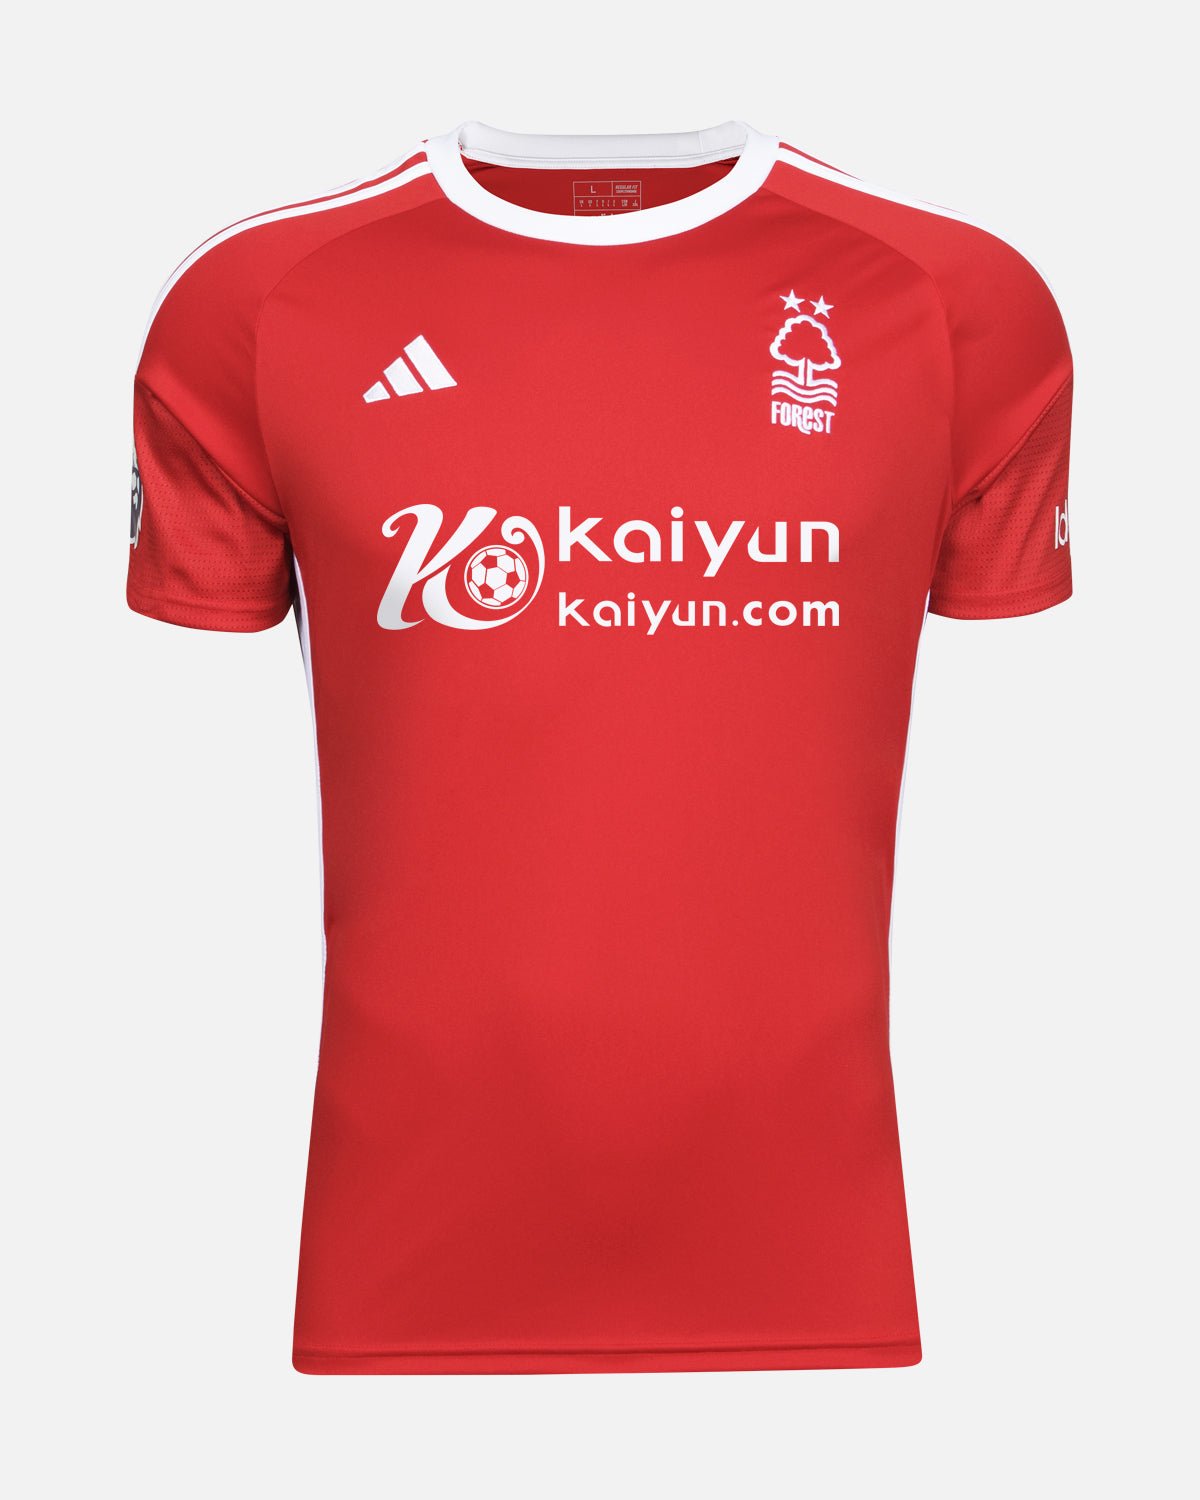 NFFC Home Shirt 23-24 - Boly 30 - Nottingham Forest FC